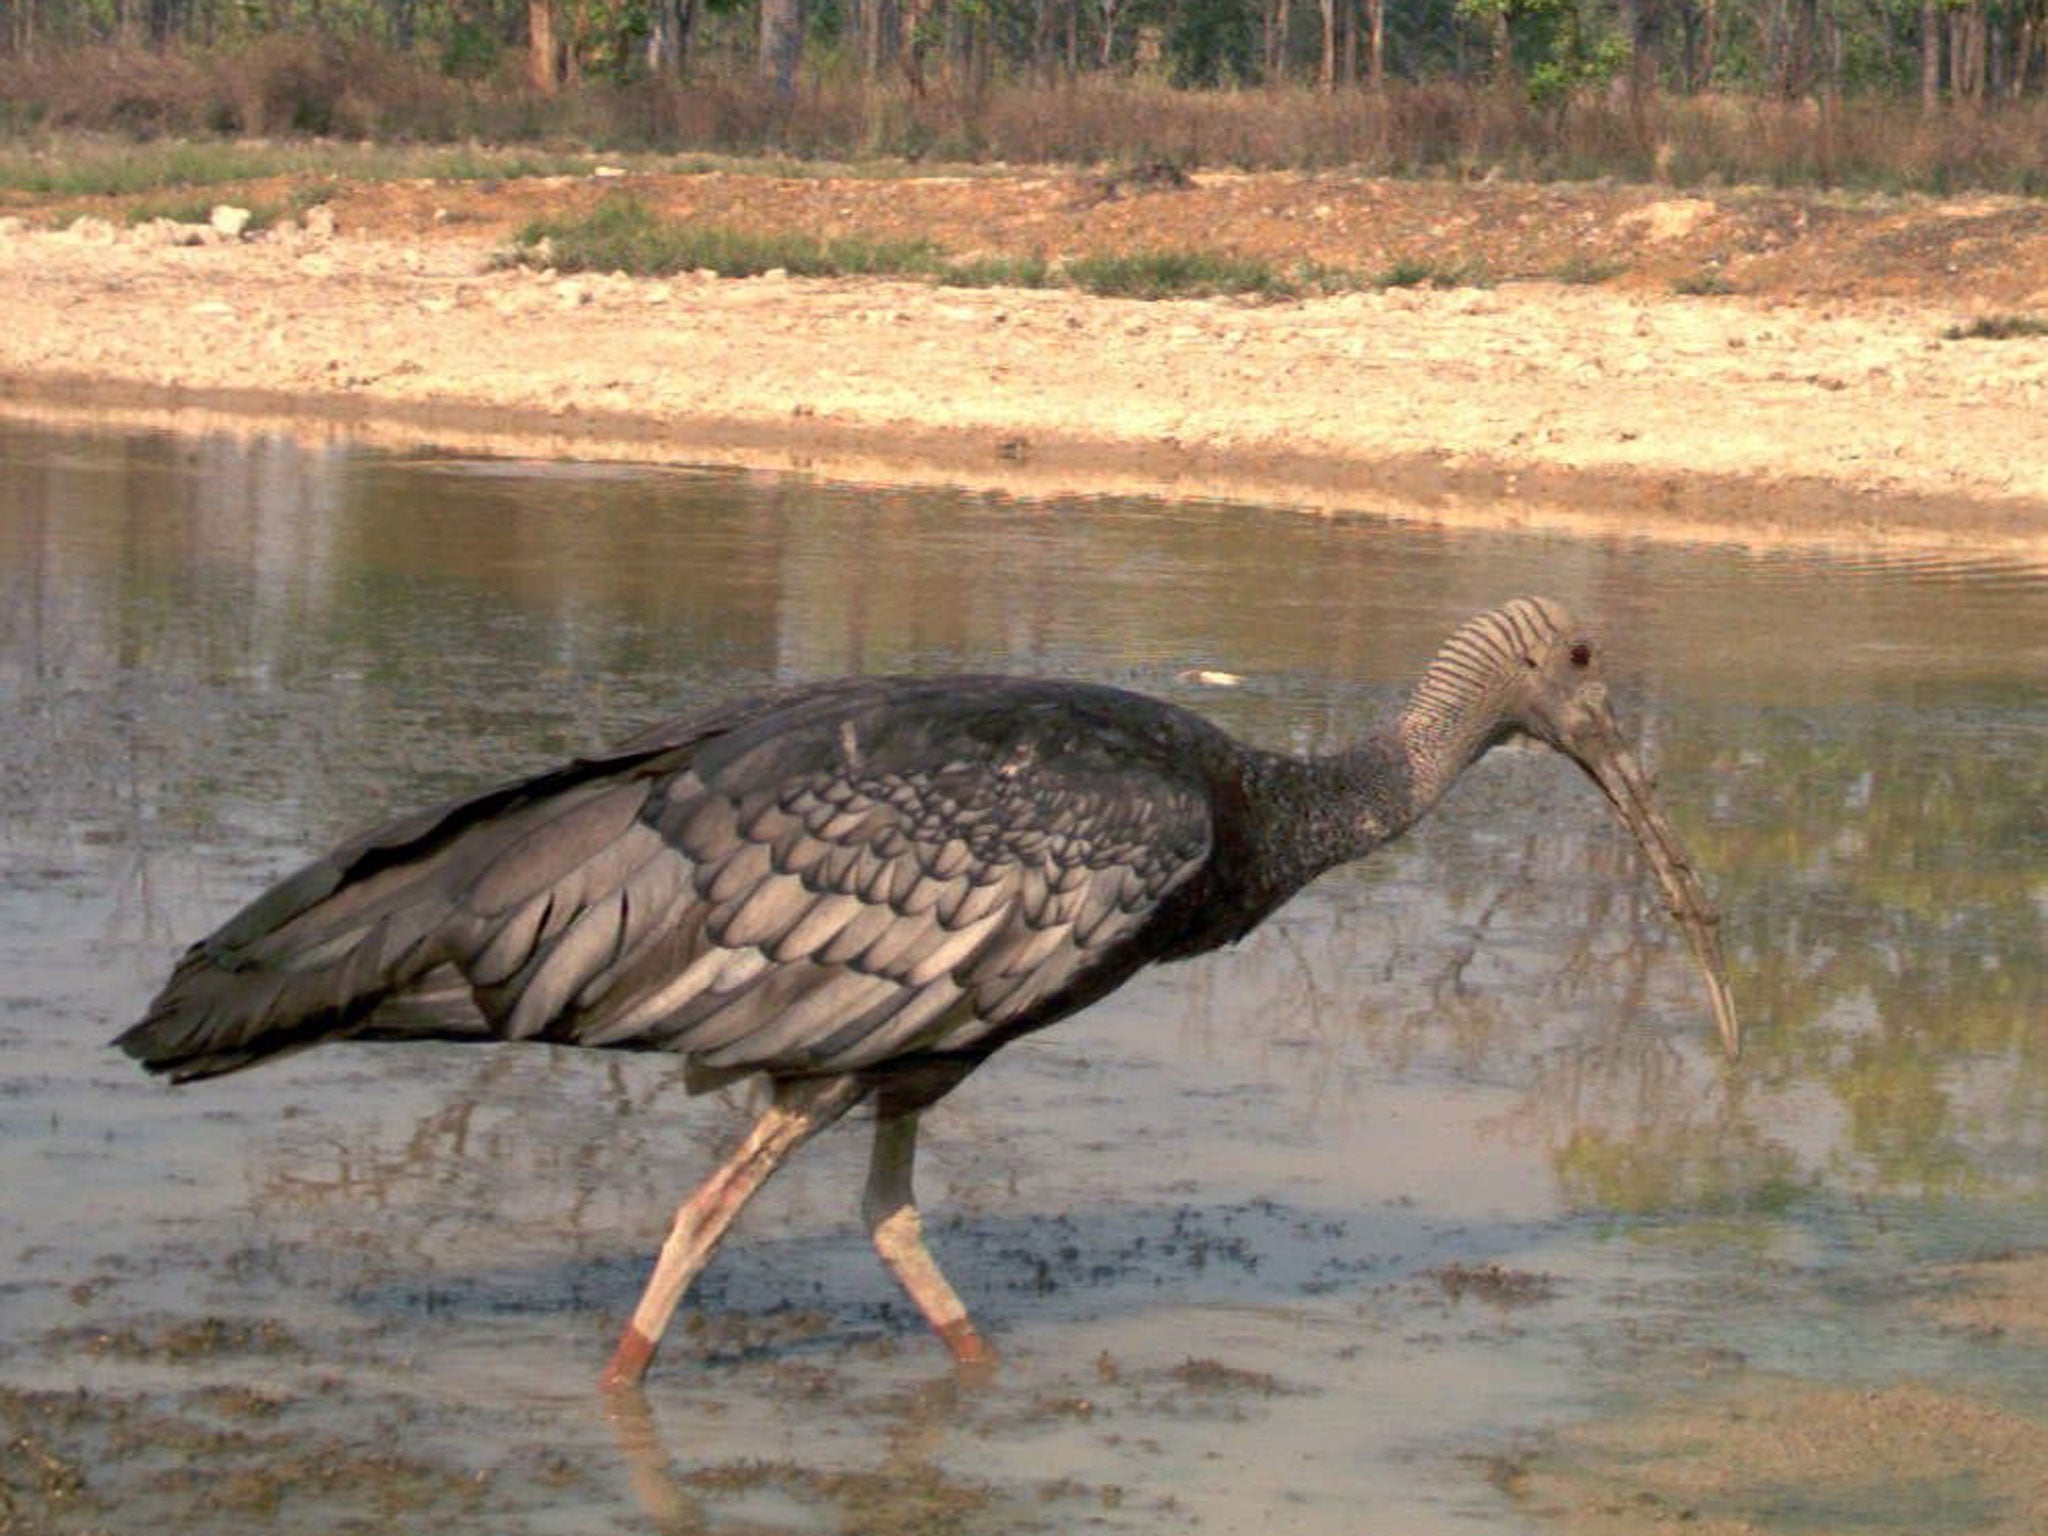 A giant ibis searches for food in a pond in Mondulkiri province